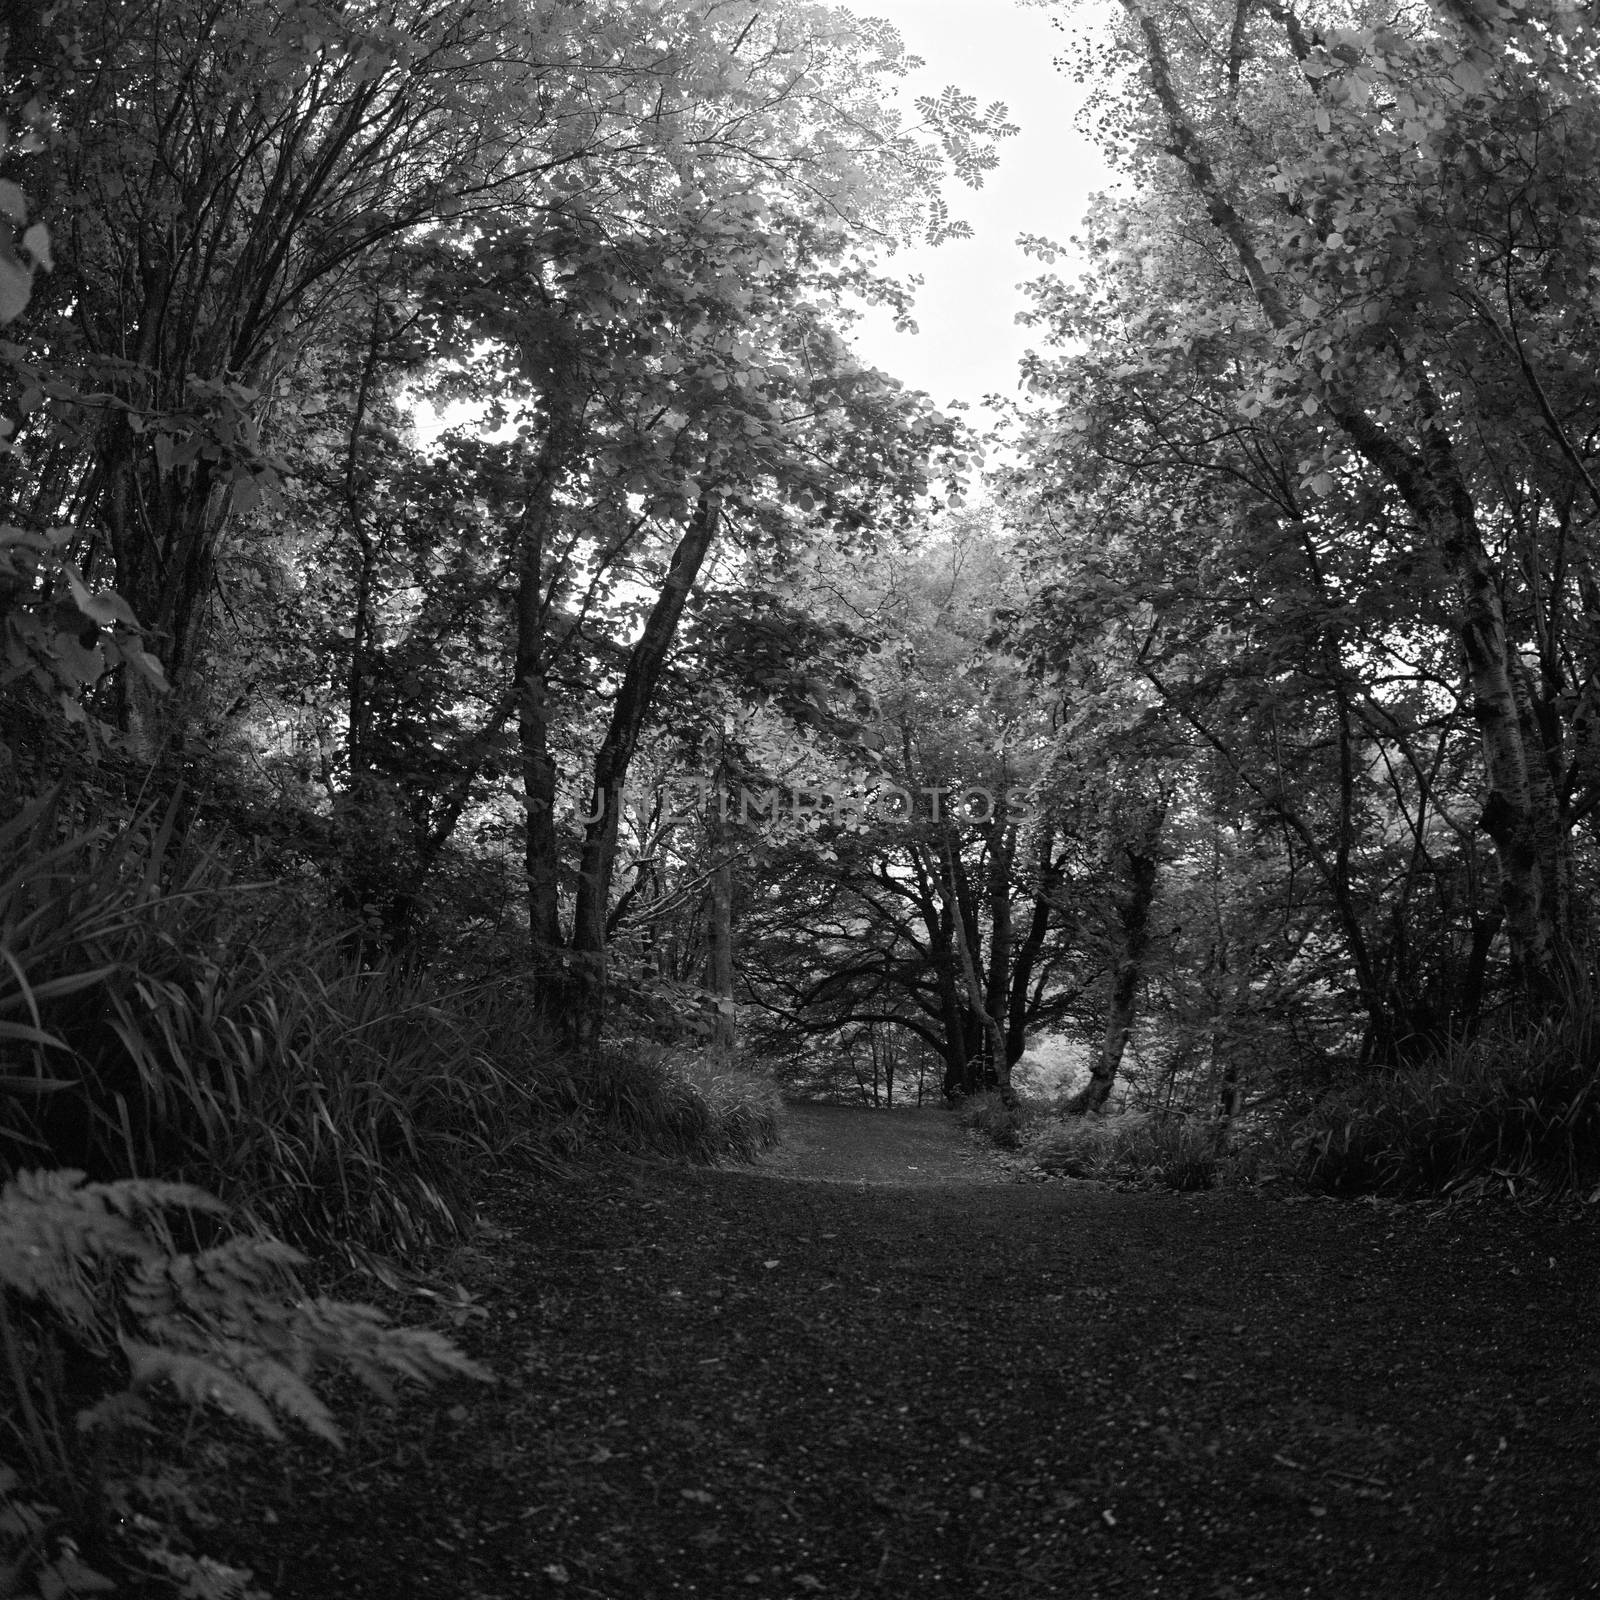 Black and white film image of forrest in Maidencraig, Aberdeen